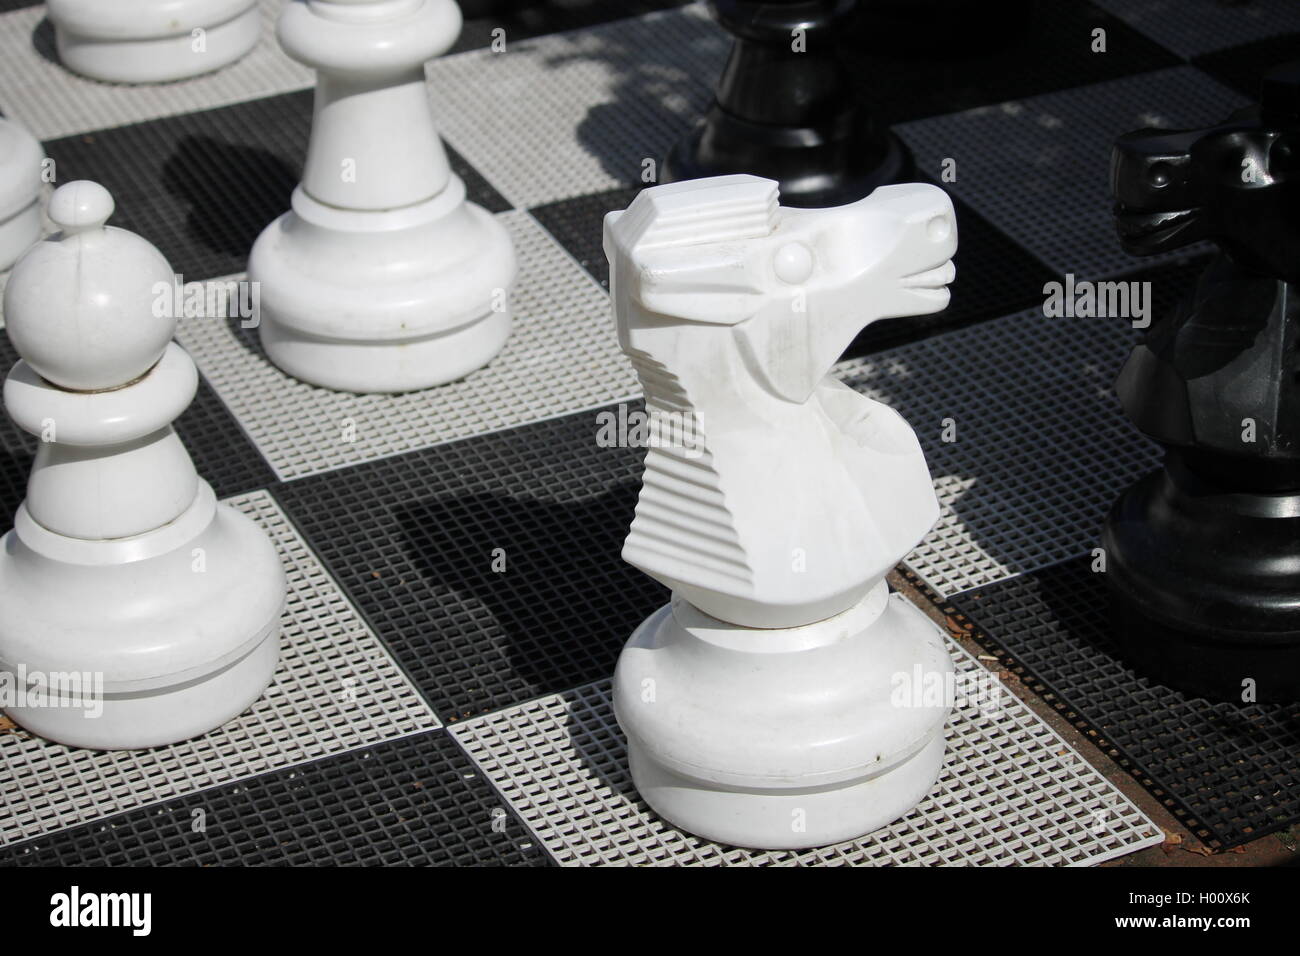 Giant chess, boardgame, game, London, park, summer, games, fun, tourist, outdoor game, party, entertaining Stock Photo